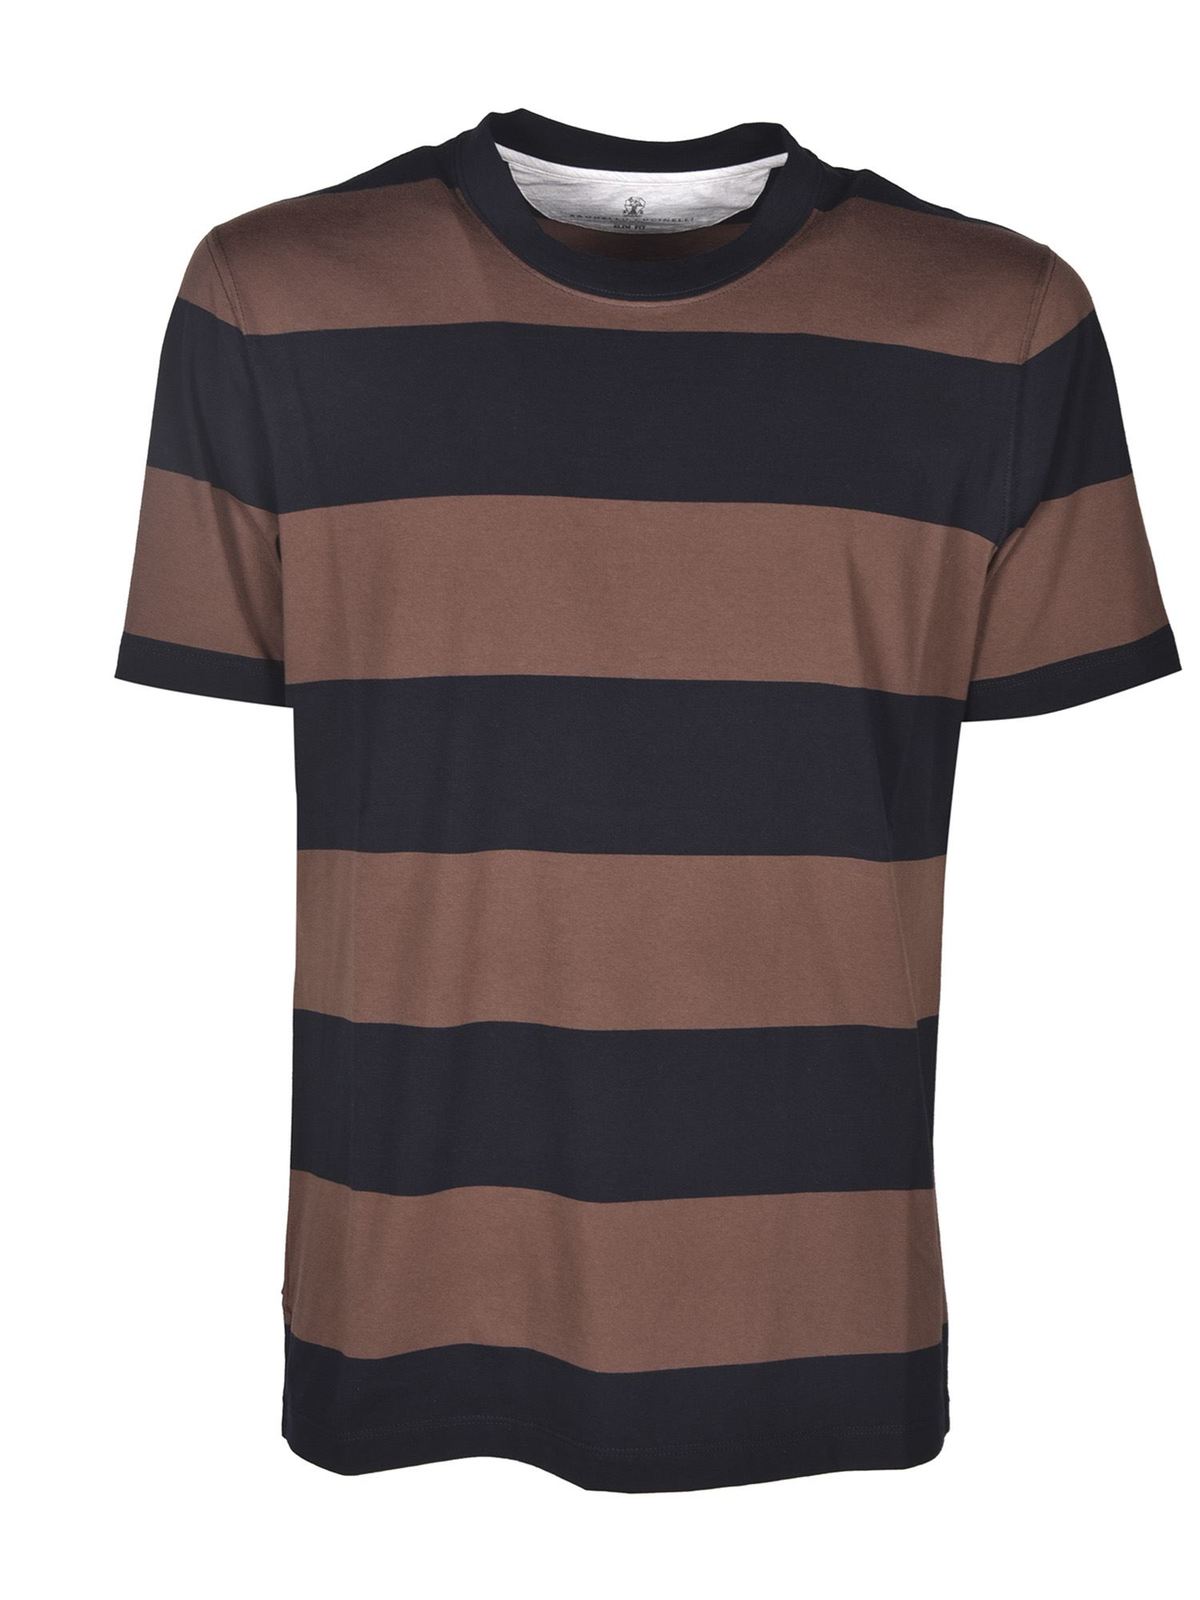 BRUNELLO CUCINELLI STRIPED T-SHIRT IN BROWN AND BLUE